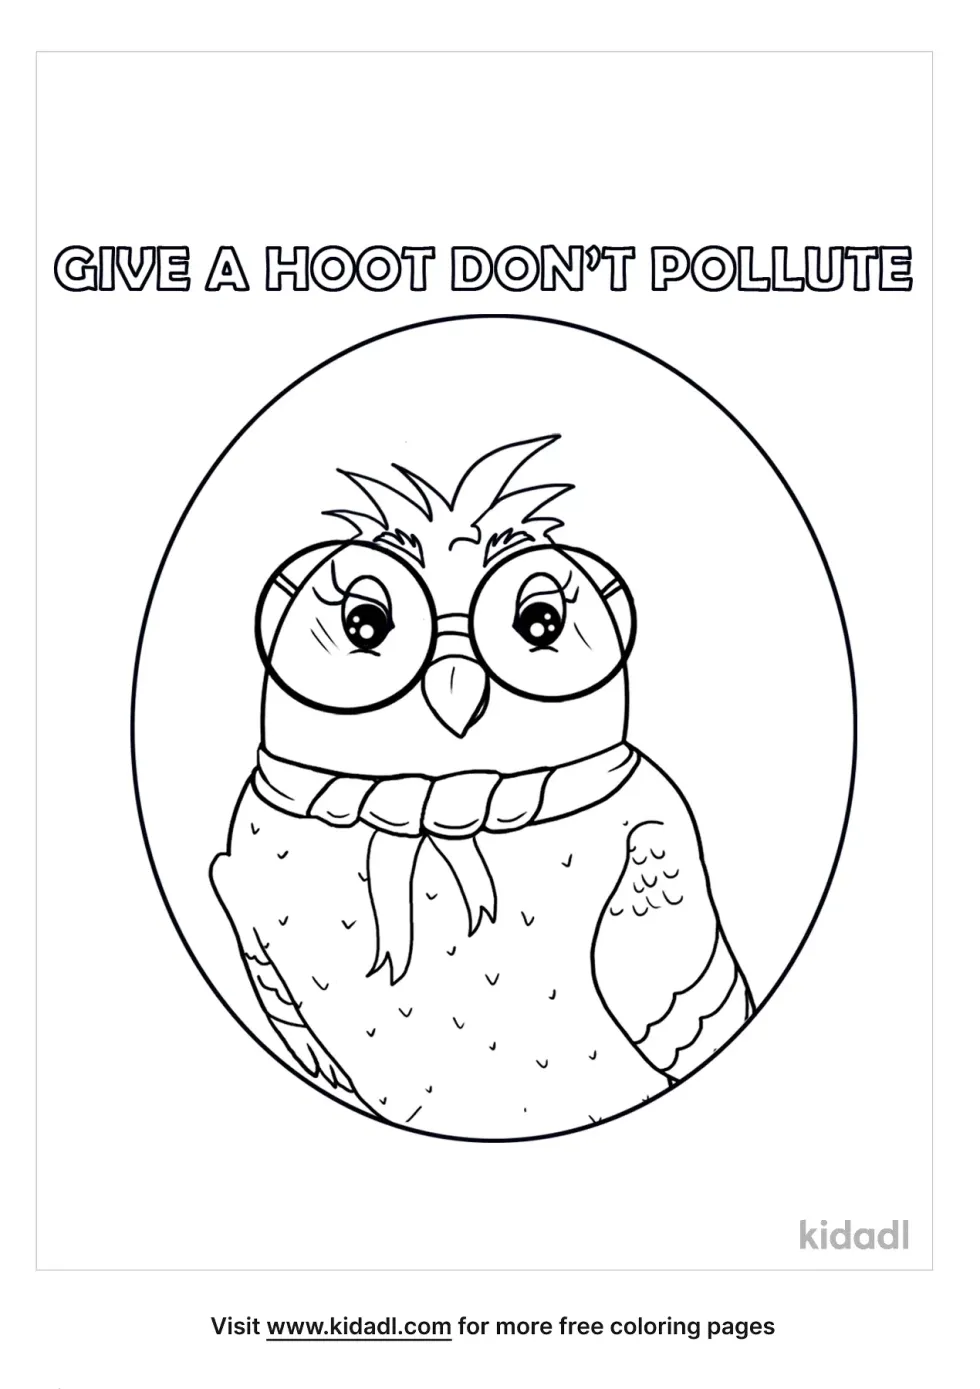 Give A Hoot Don't Pollute